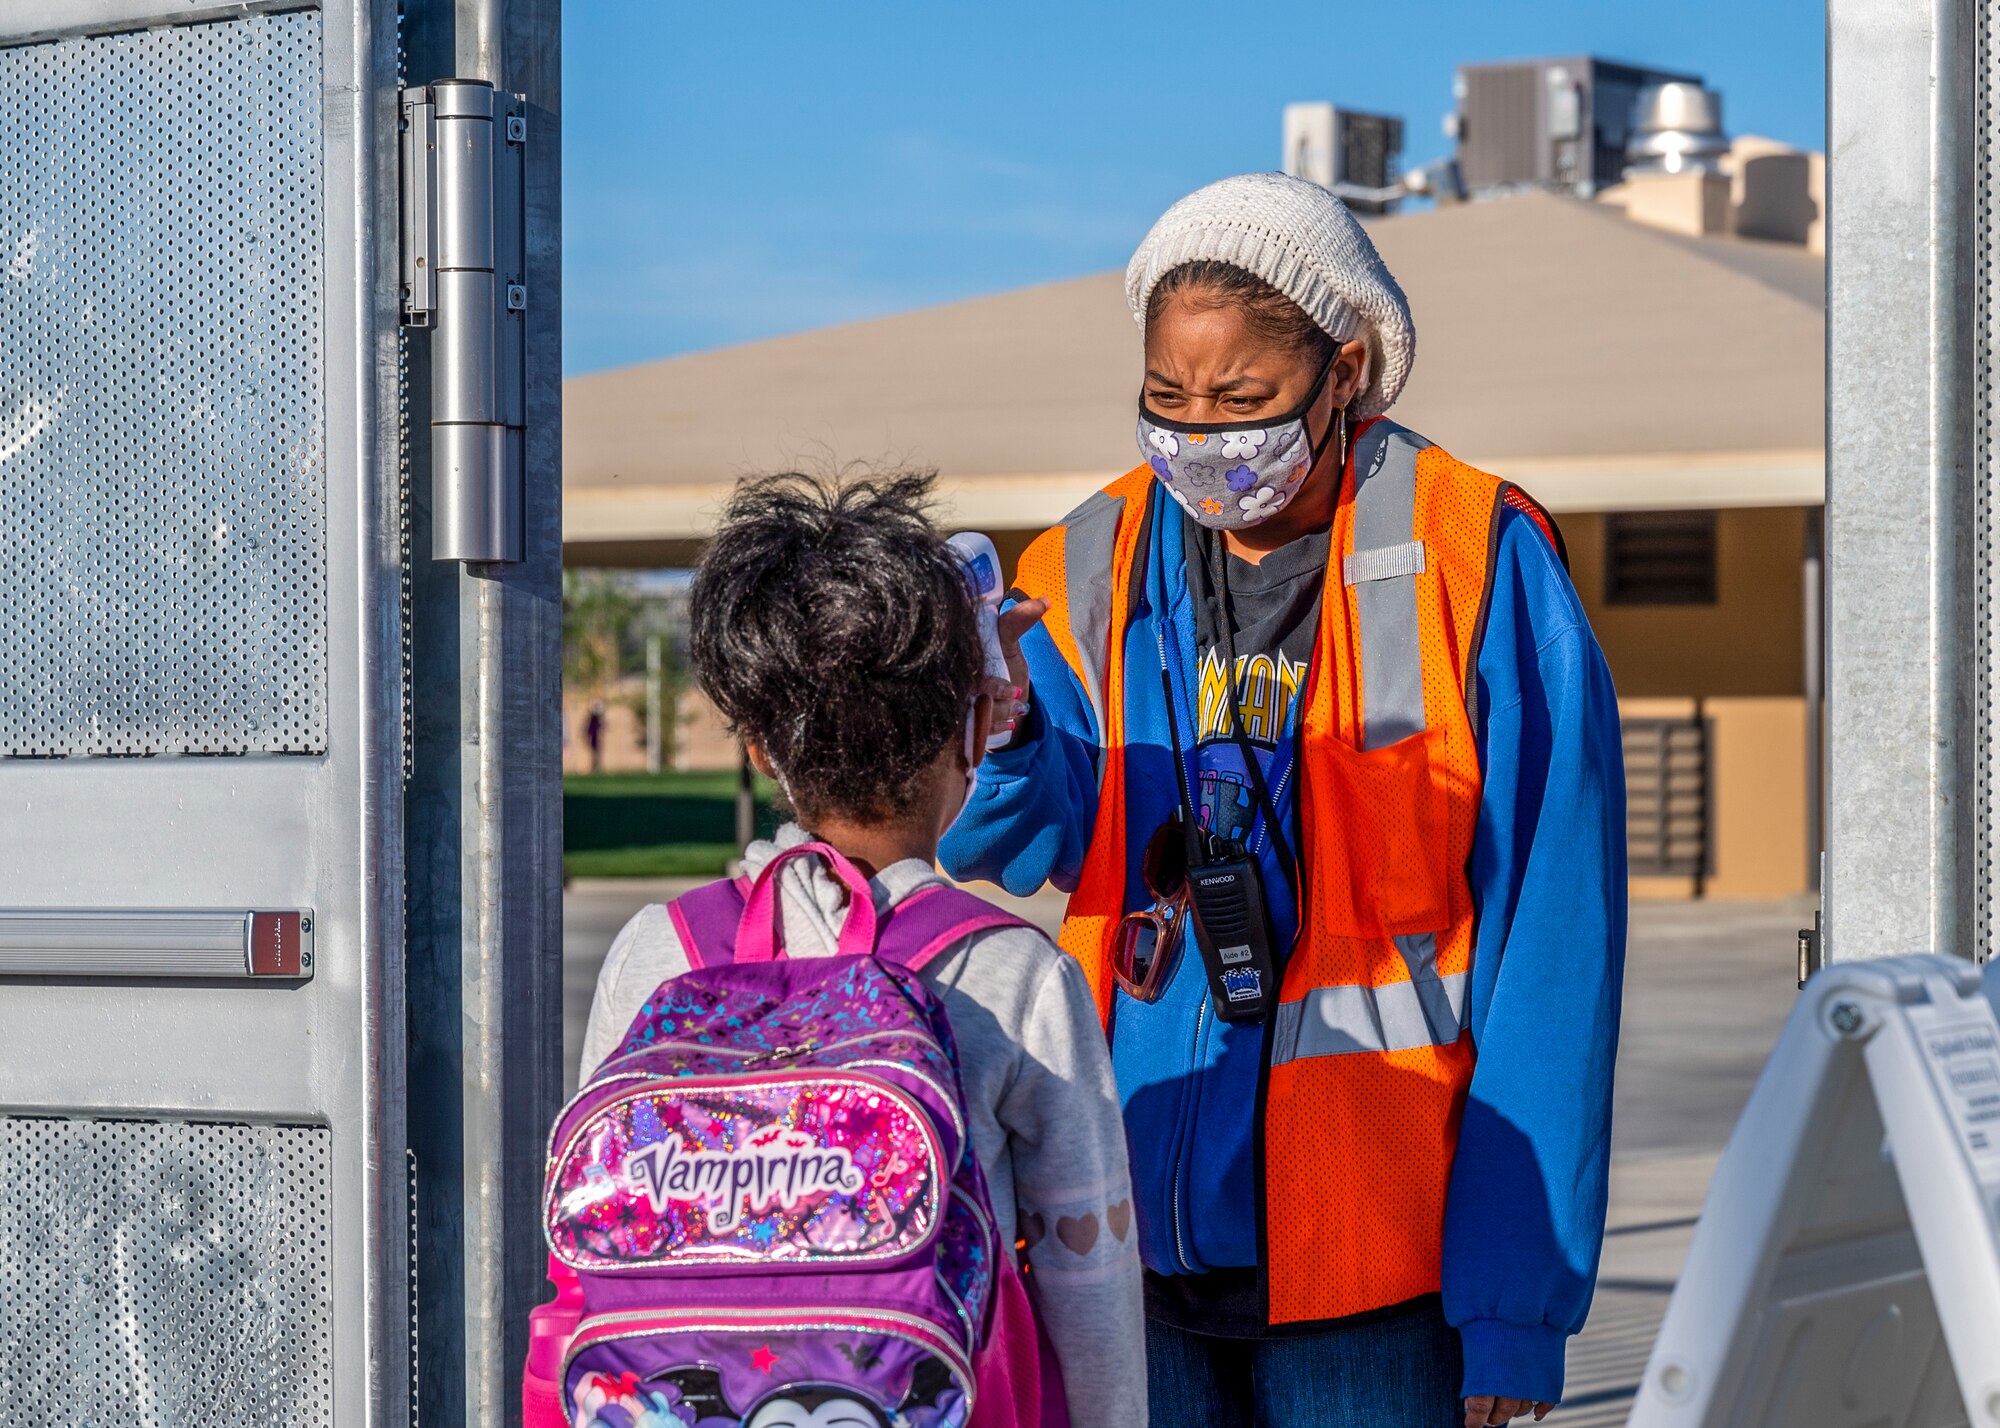 A Bailey Elementary School faculty member checks a student's temperature before entering school premises during the first day of physical in-person learning and grand reopening of Bailey Elementary School on Edwards Air Force Base, California, April 12. (Air Force photo by Giancarlo Casem)